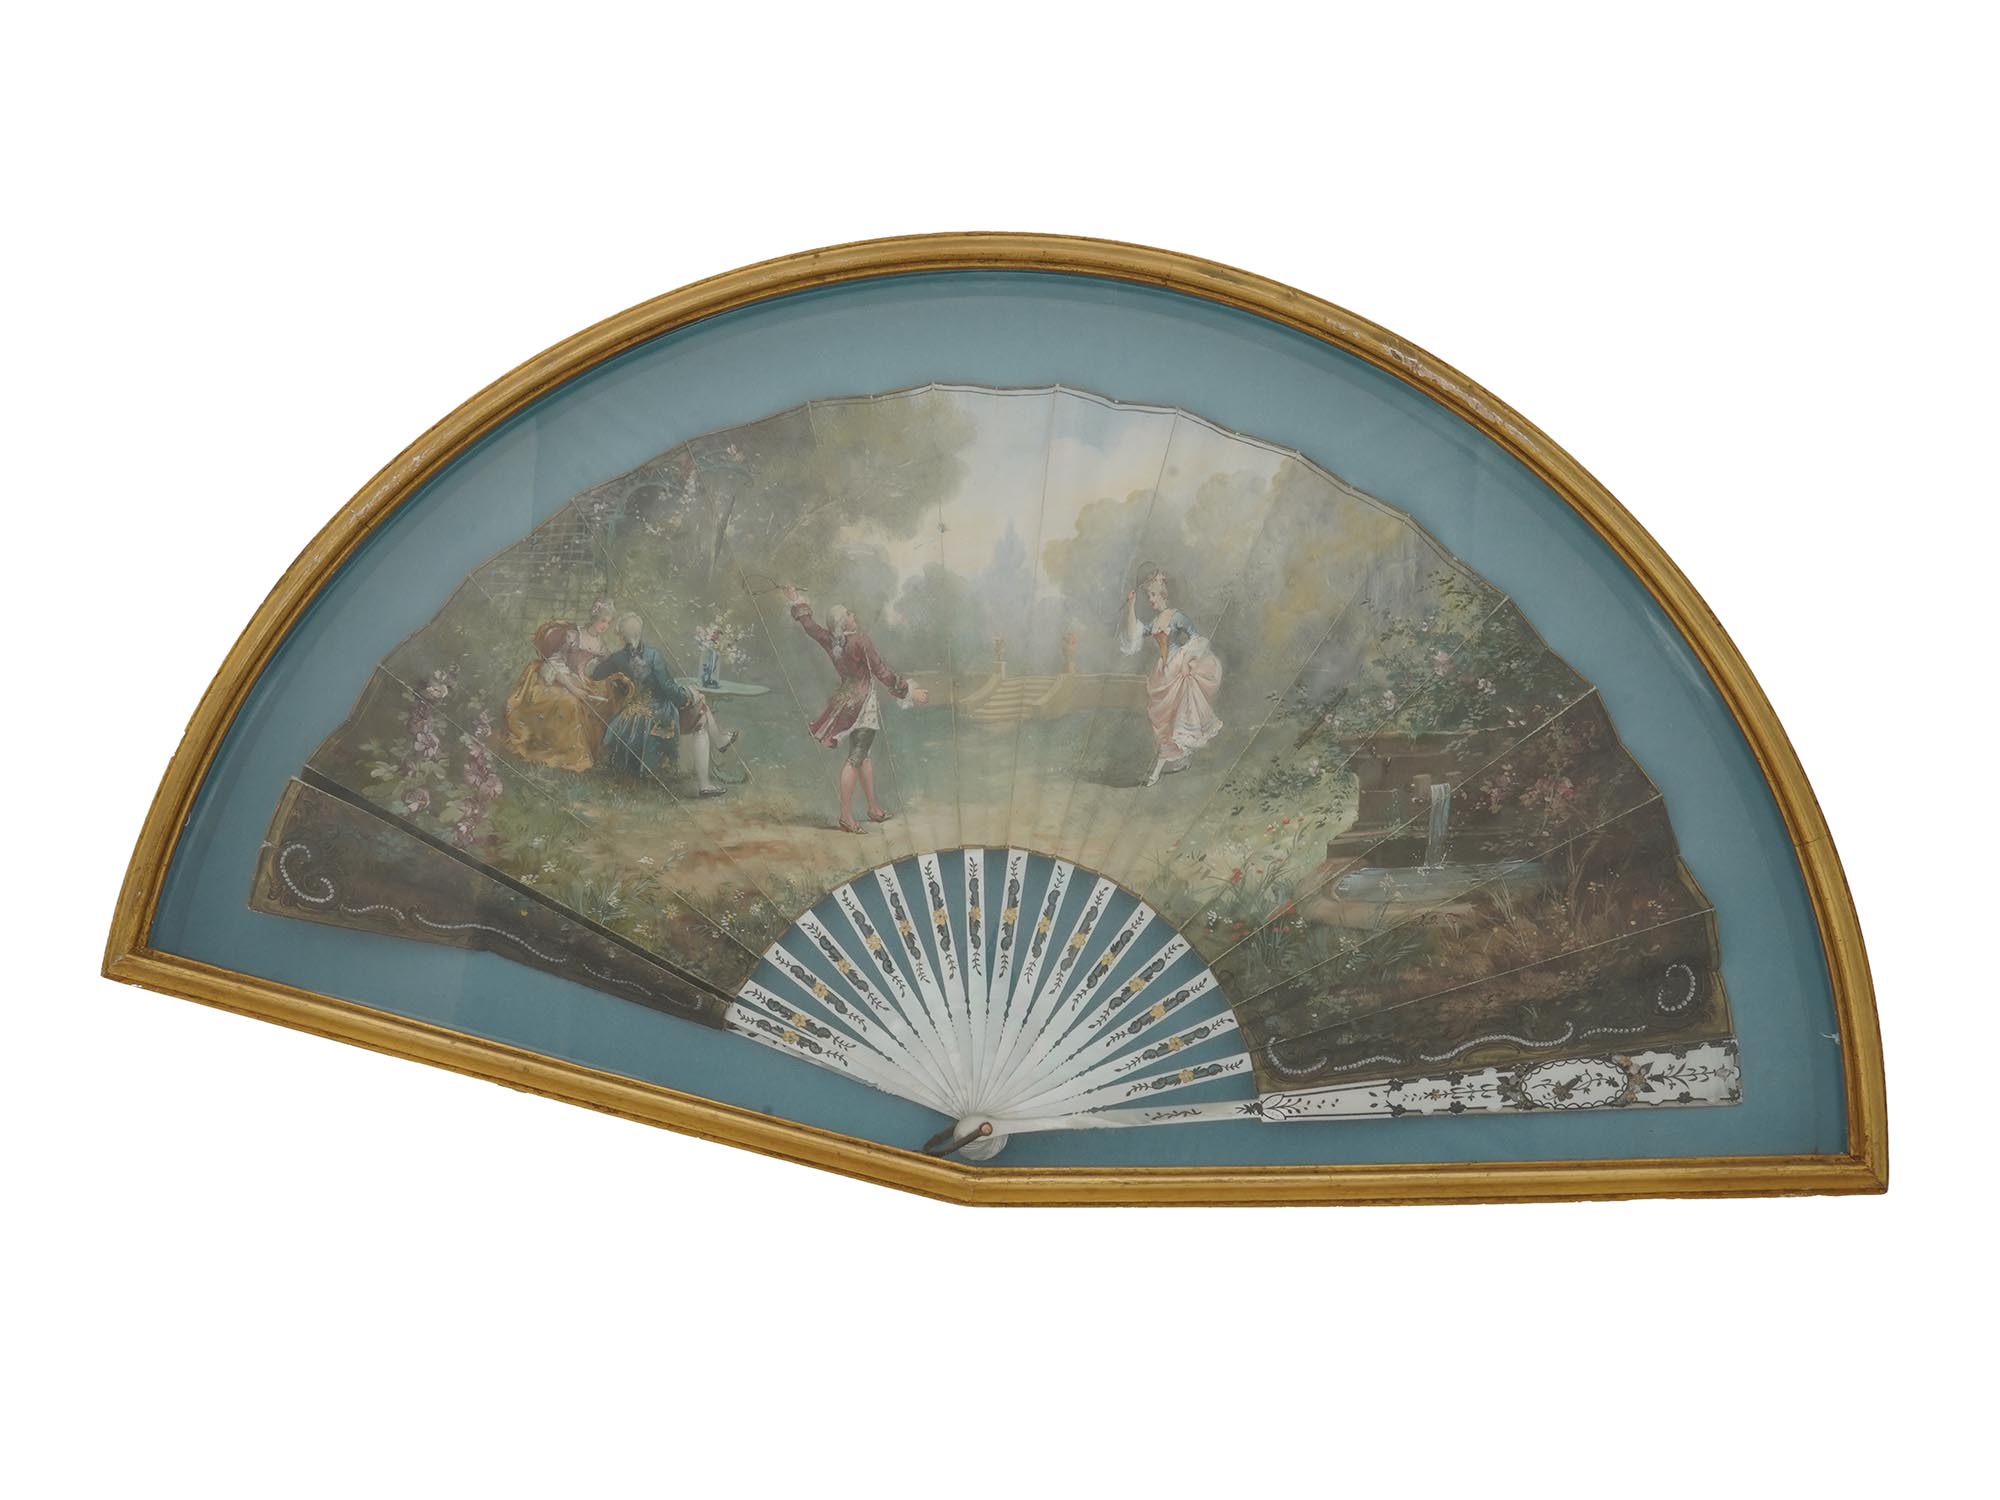 ANTIQUE FRENCH MOTHER OF PEARL PAINTED FAN SIGNED PIC-0